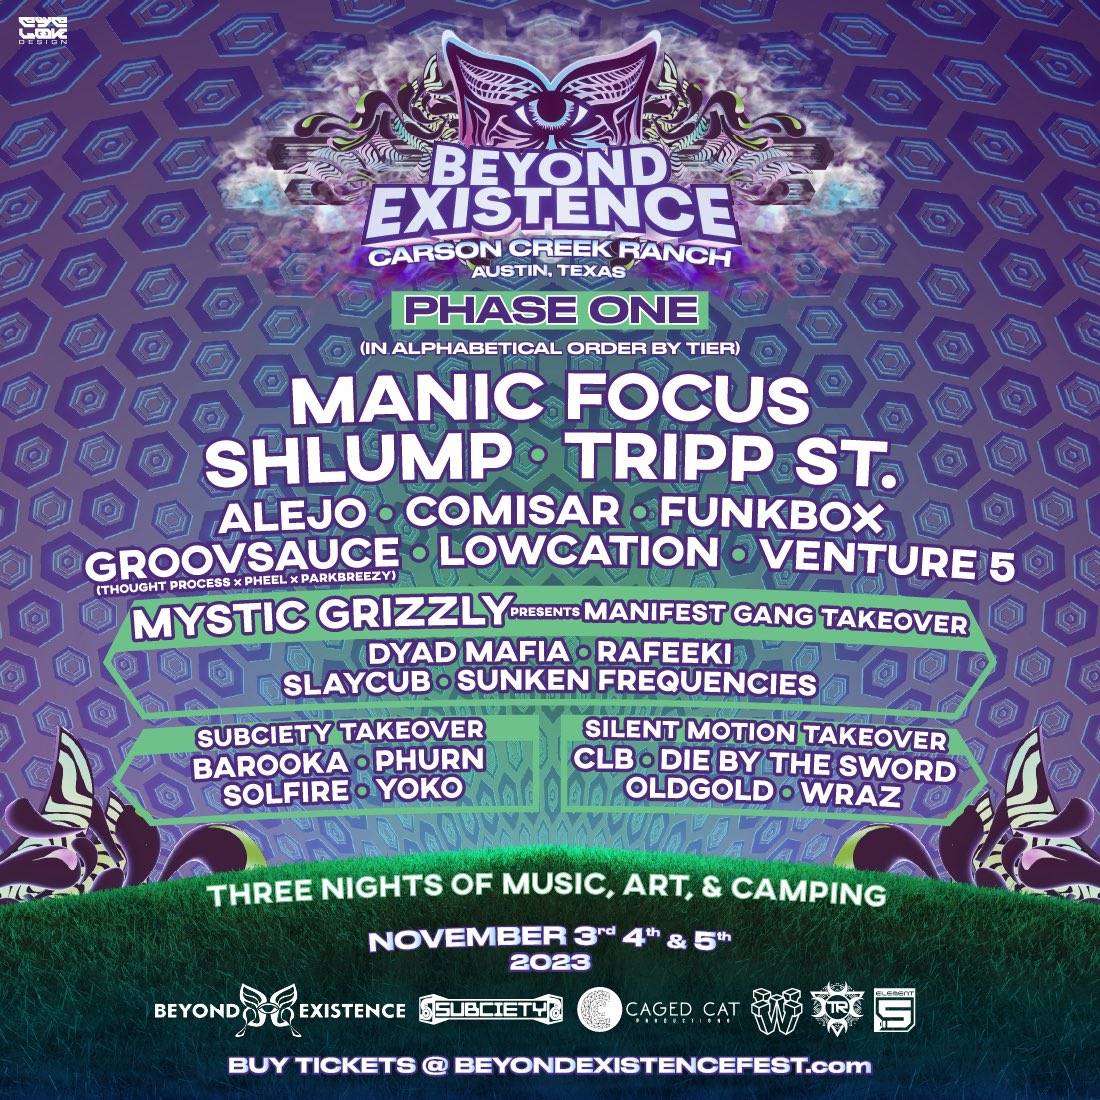 🌙🦋PHASE ONE🦋🌙 @ManicFocus, @shlumpbass + @Tripp_st join us at our 5th anniversary of Beyond Existence. Special takeovers from @ManifestGang, @TheSubciety, + @silentmotionrec This is only the beginning… Grab your TIER 1 tickets now!